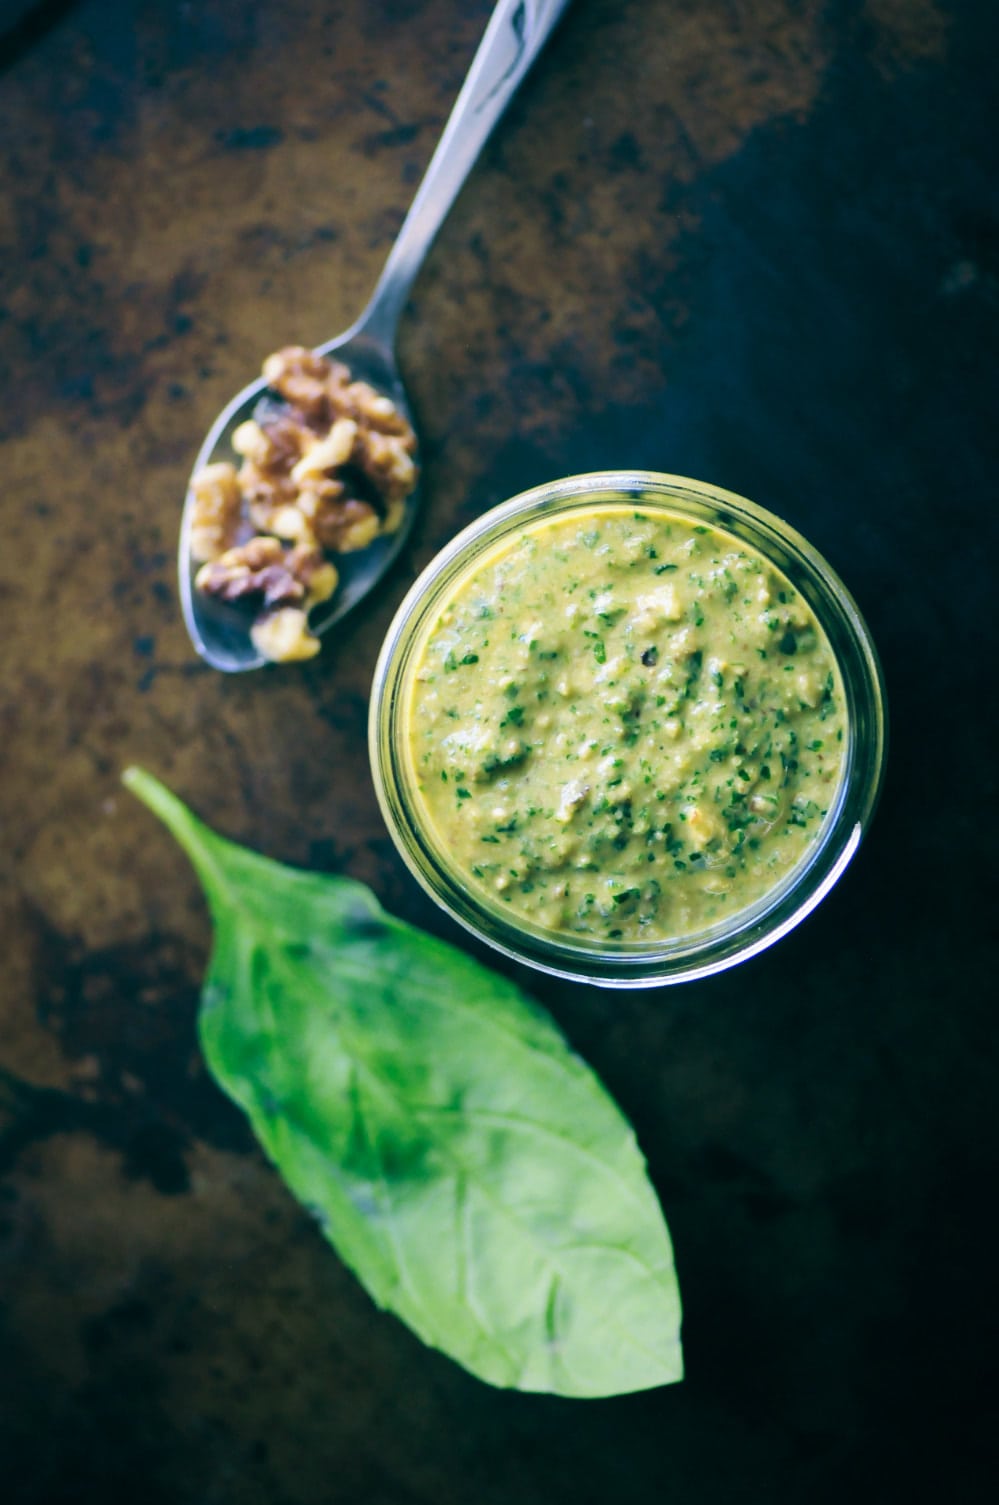  This amazingly creamy and delicious Cheesy Vegan Walnut Pesto is made from a blend of basil, spinach, kale, garlic, walnuts, and nutritional yeast! It is vegan, gluten-free, healthy, vibrant and ridiculously tasty. It makes for one perfect green condiment ready to use on just about any savory dish! #veganpesto #walnutpesto #cheesyveganpesto #easypesto 